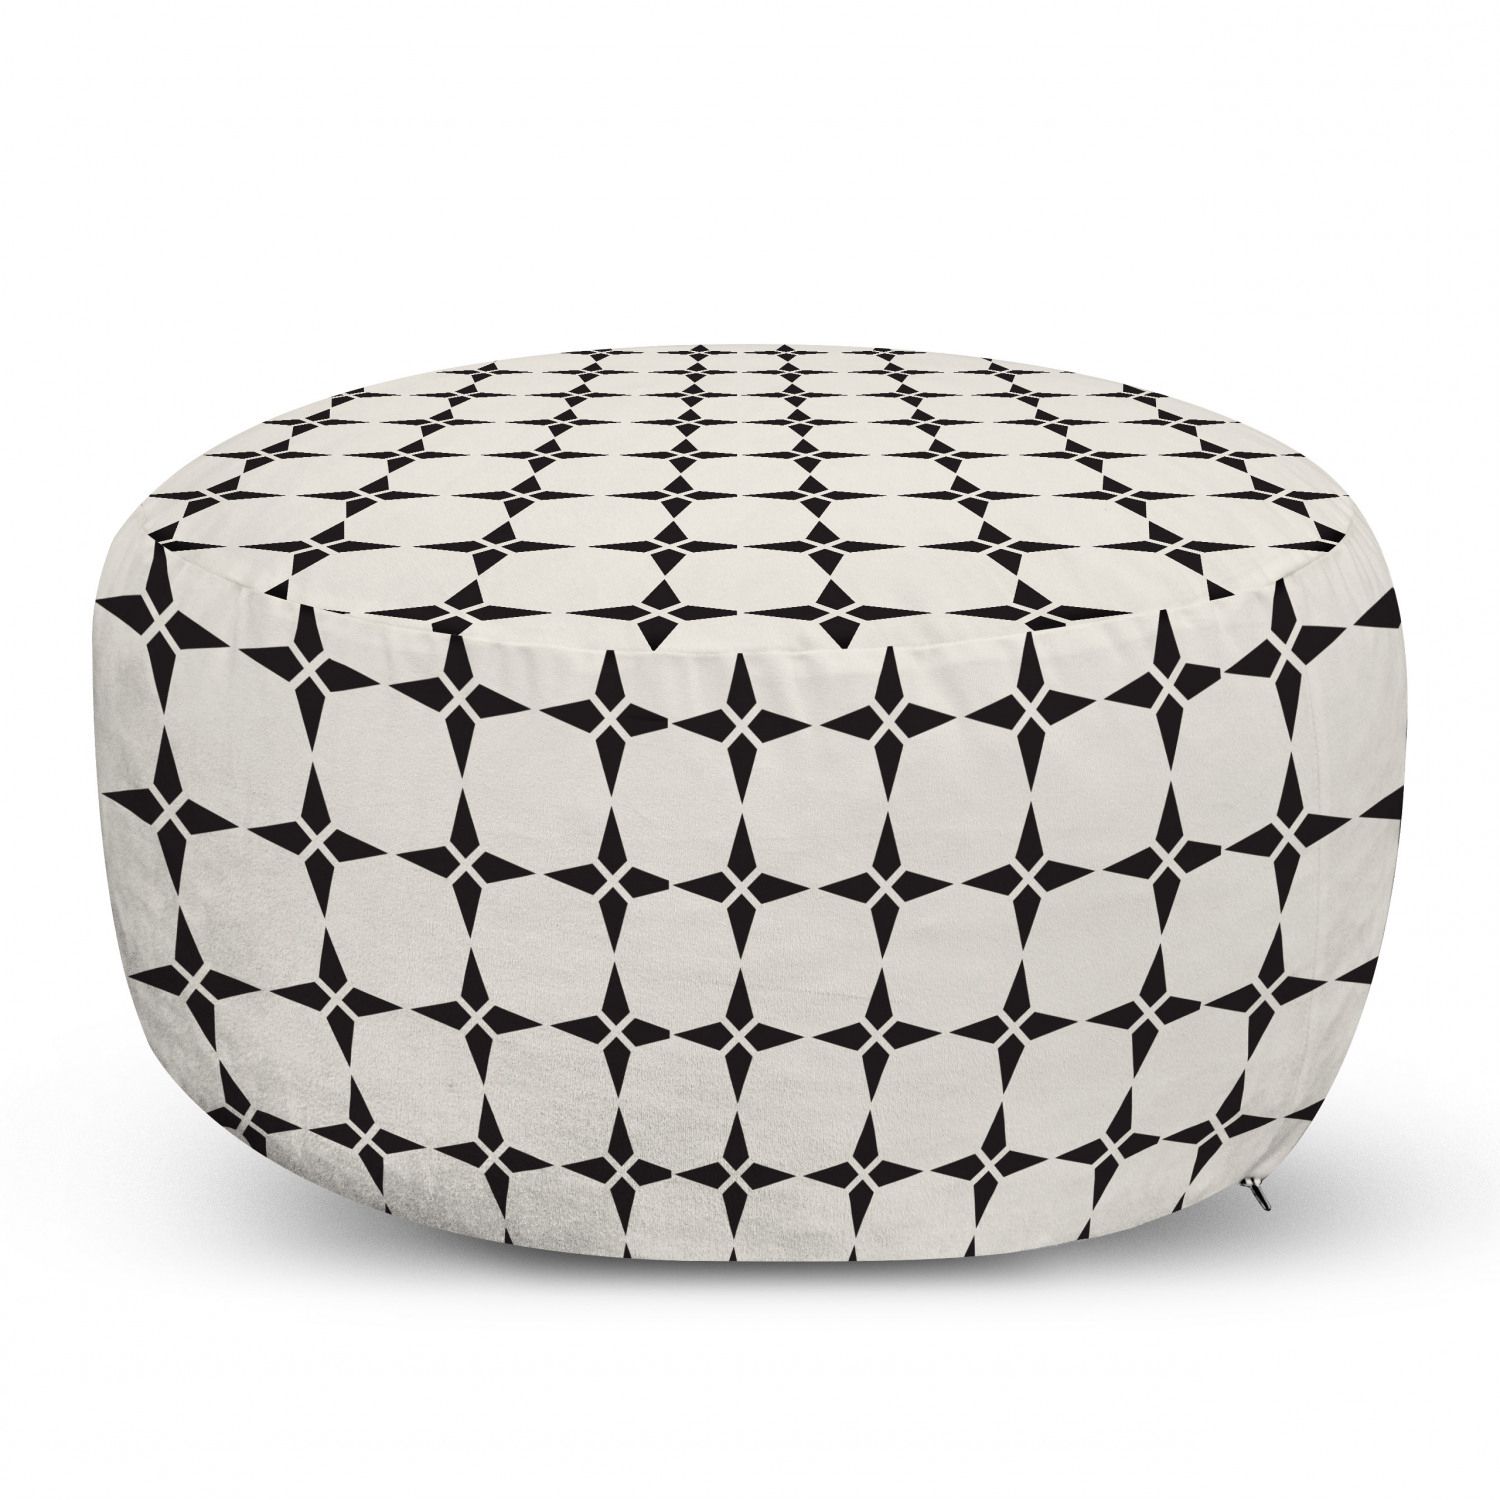 Geometric Pouf Cover With Zipper, Pattern Star Shapes Contemporary Style  Modern Design, Soft Decorative Fabric Unstuffed Case, 30" W X  (View 10 of 15)